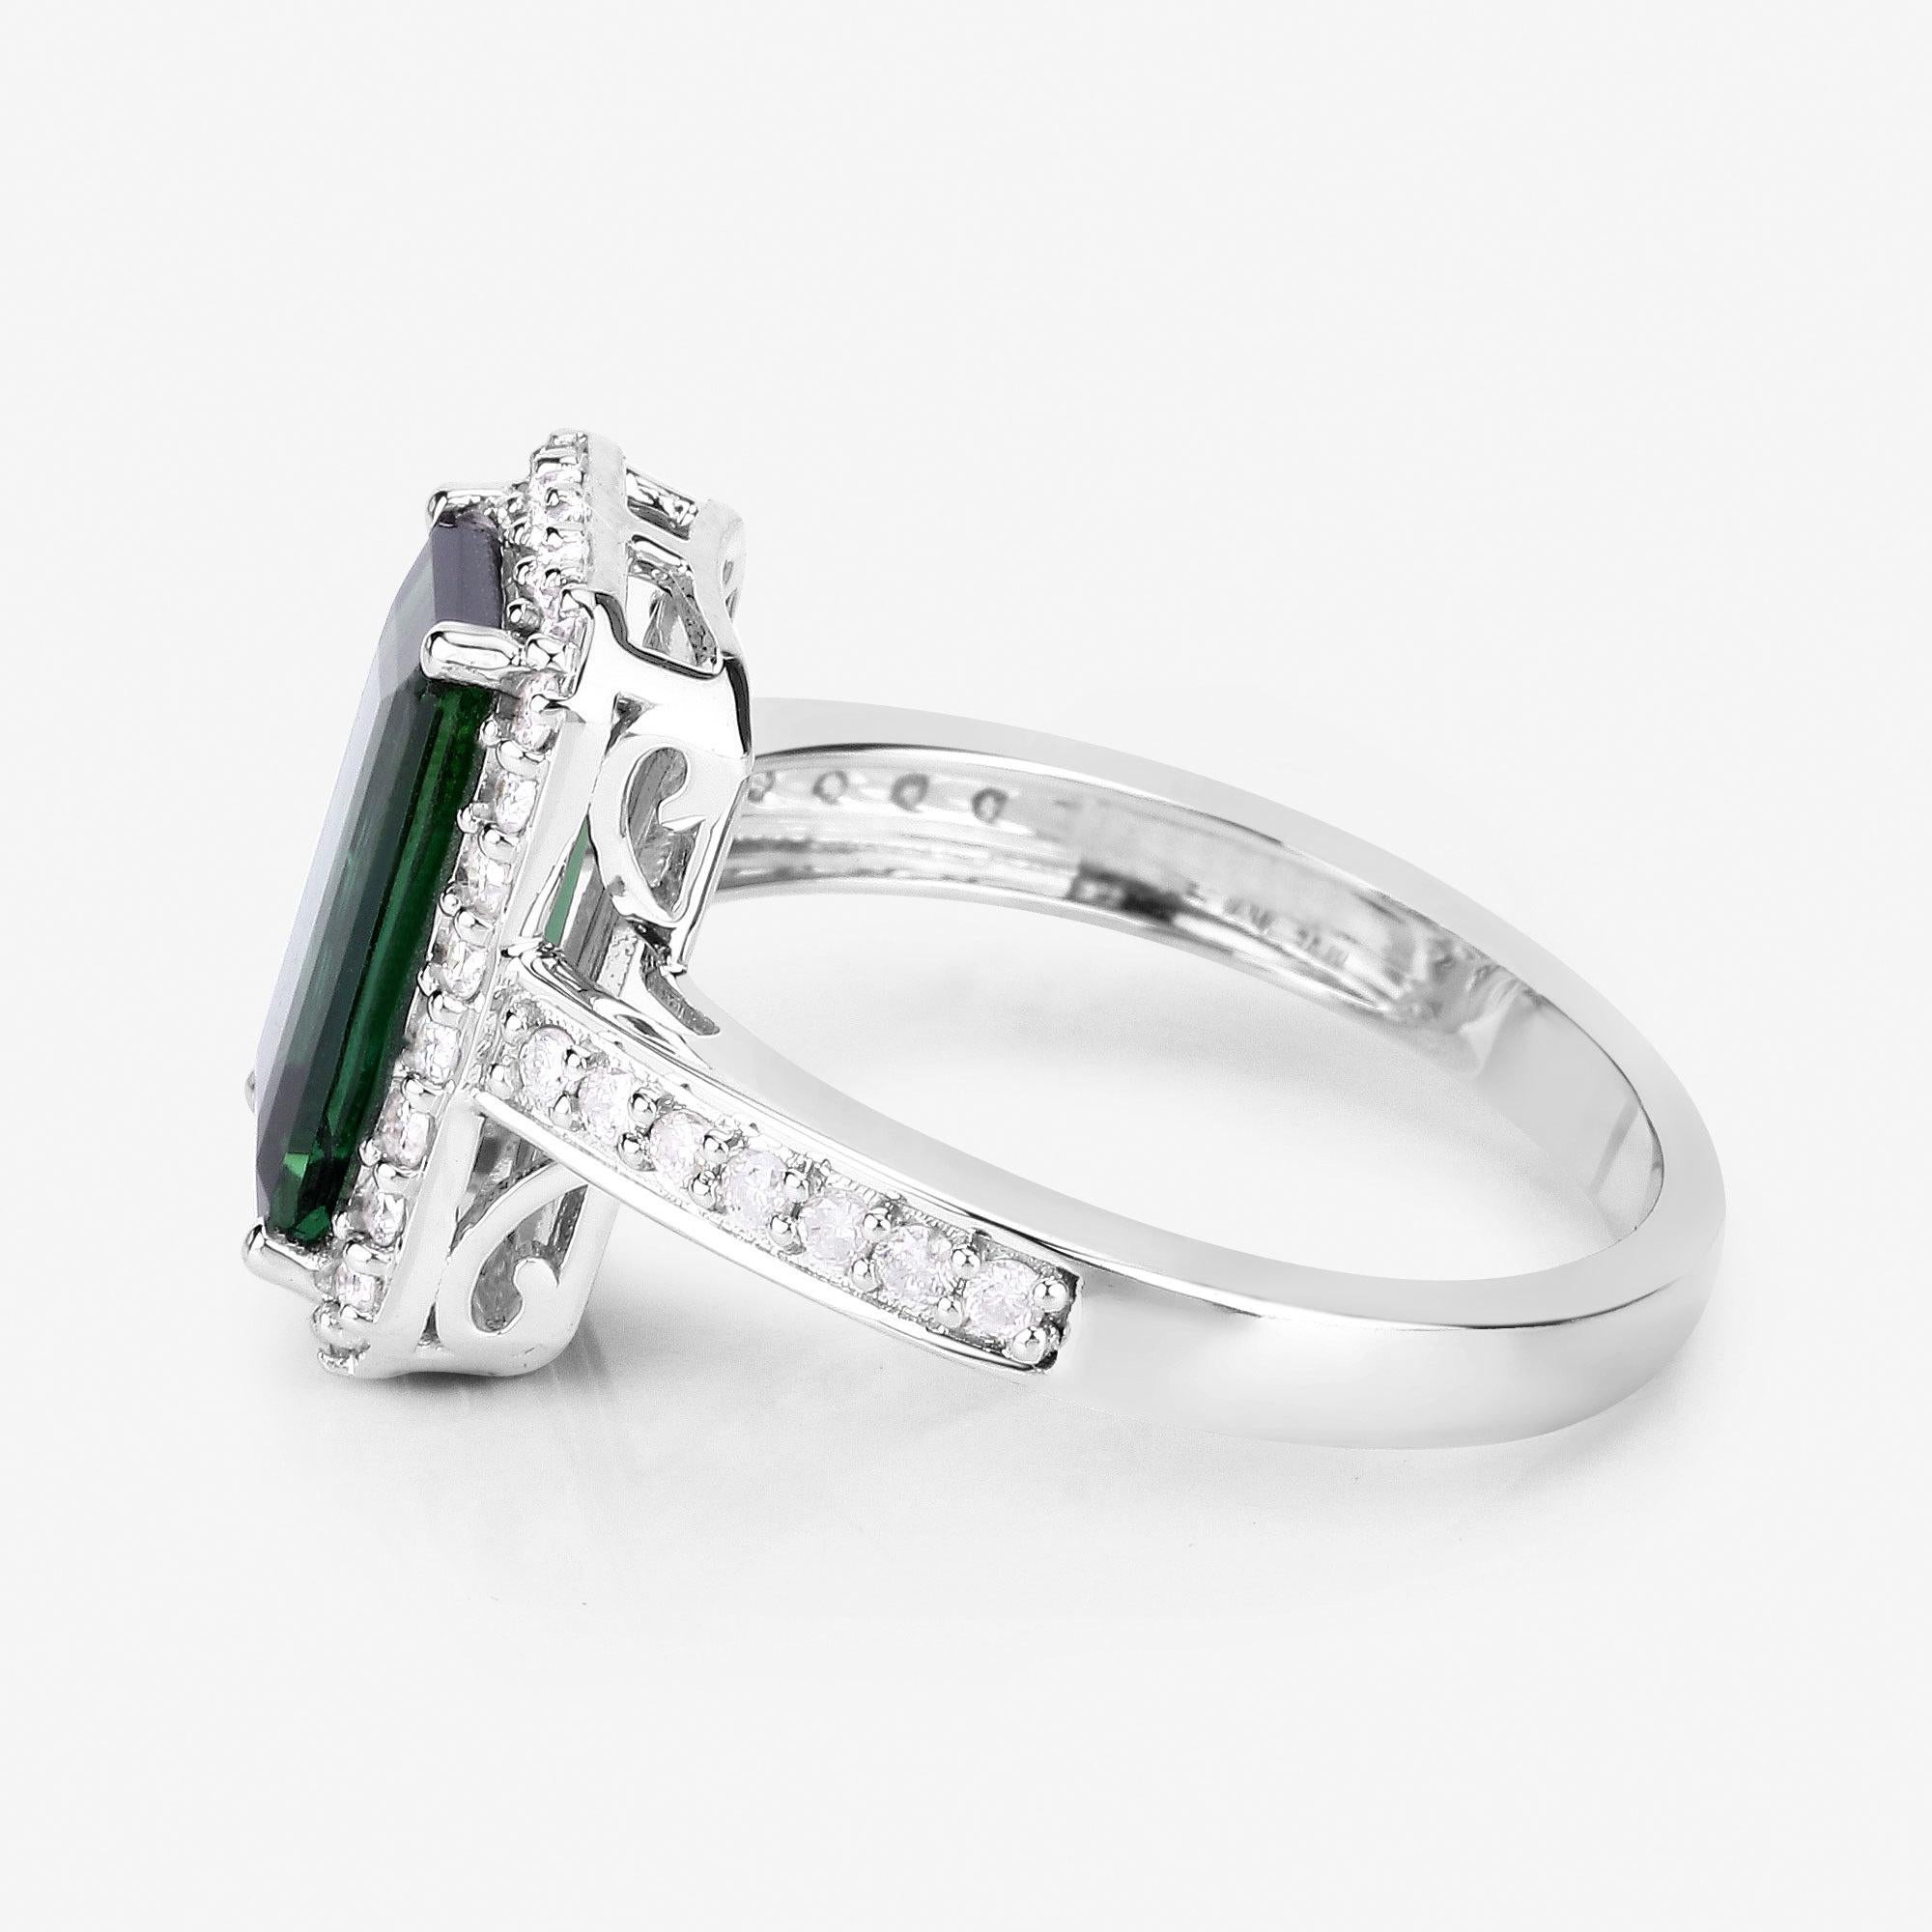 Natural Green Tourmaline and Diamond Halo Ring 3.05 Carats 14k White Gold In Excellent Condition For Sale In Laguna Niguel, CA